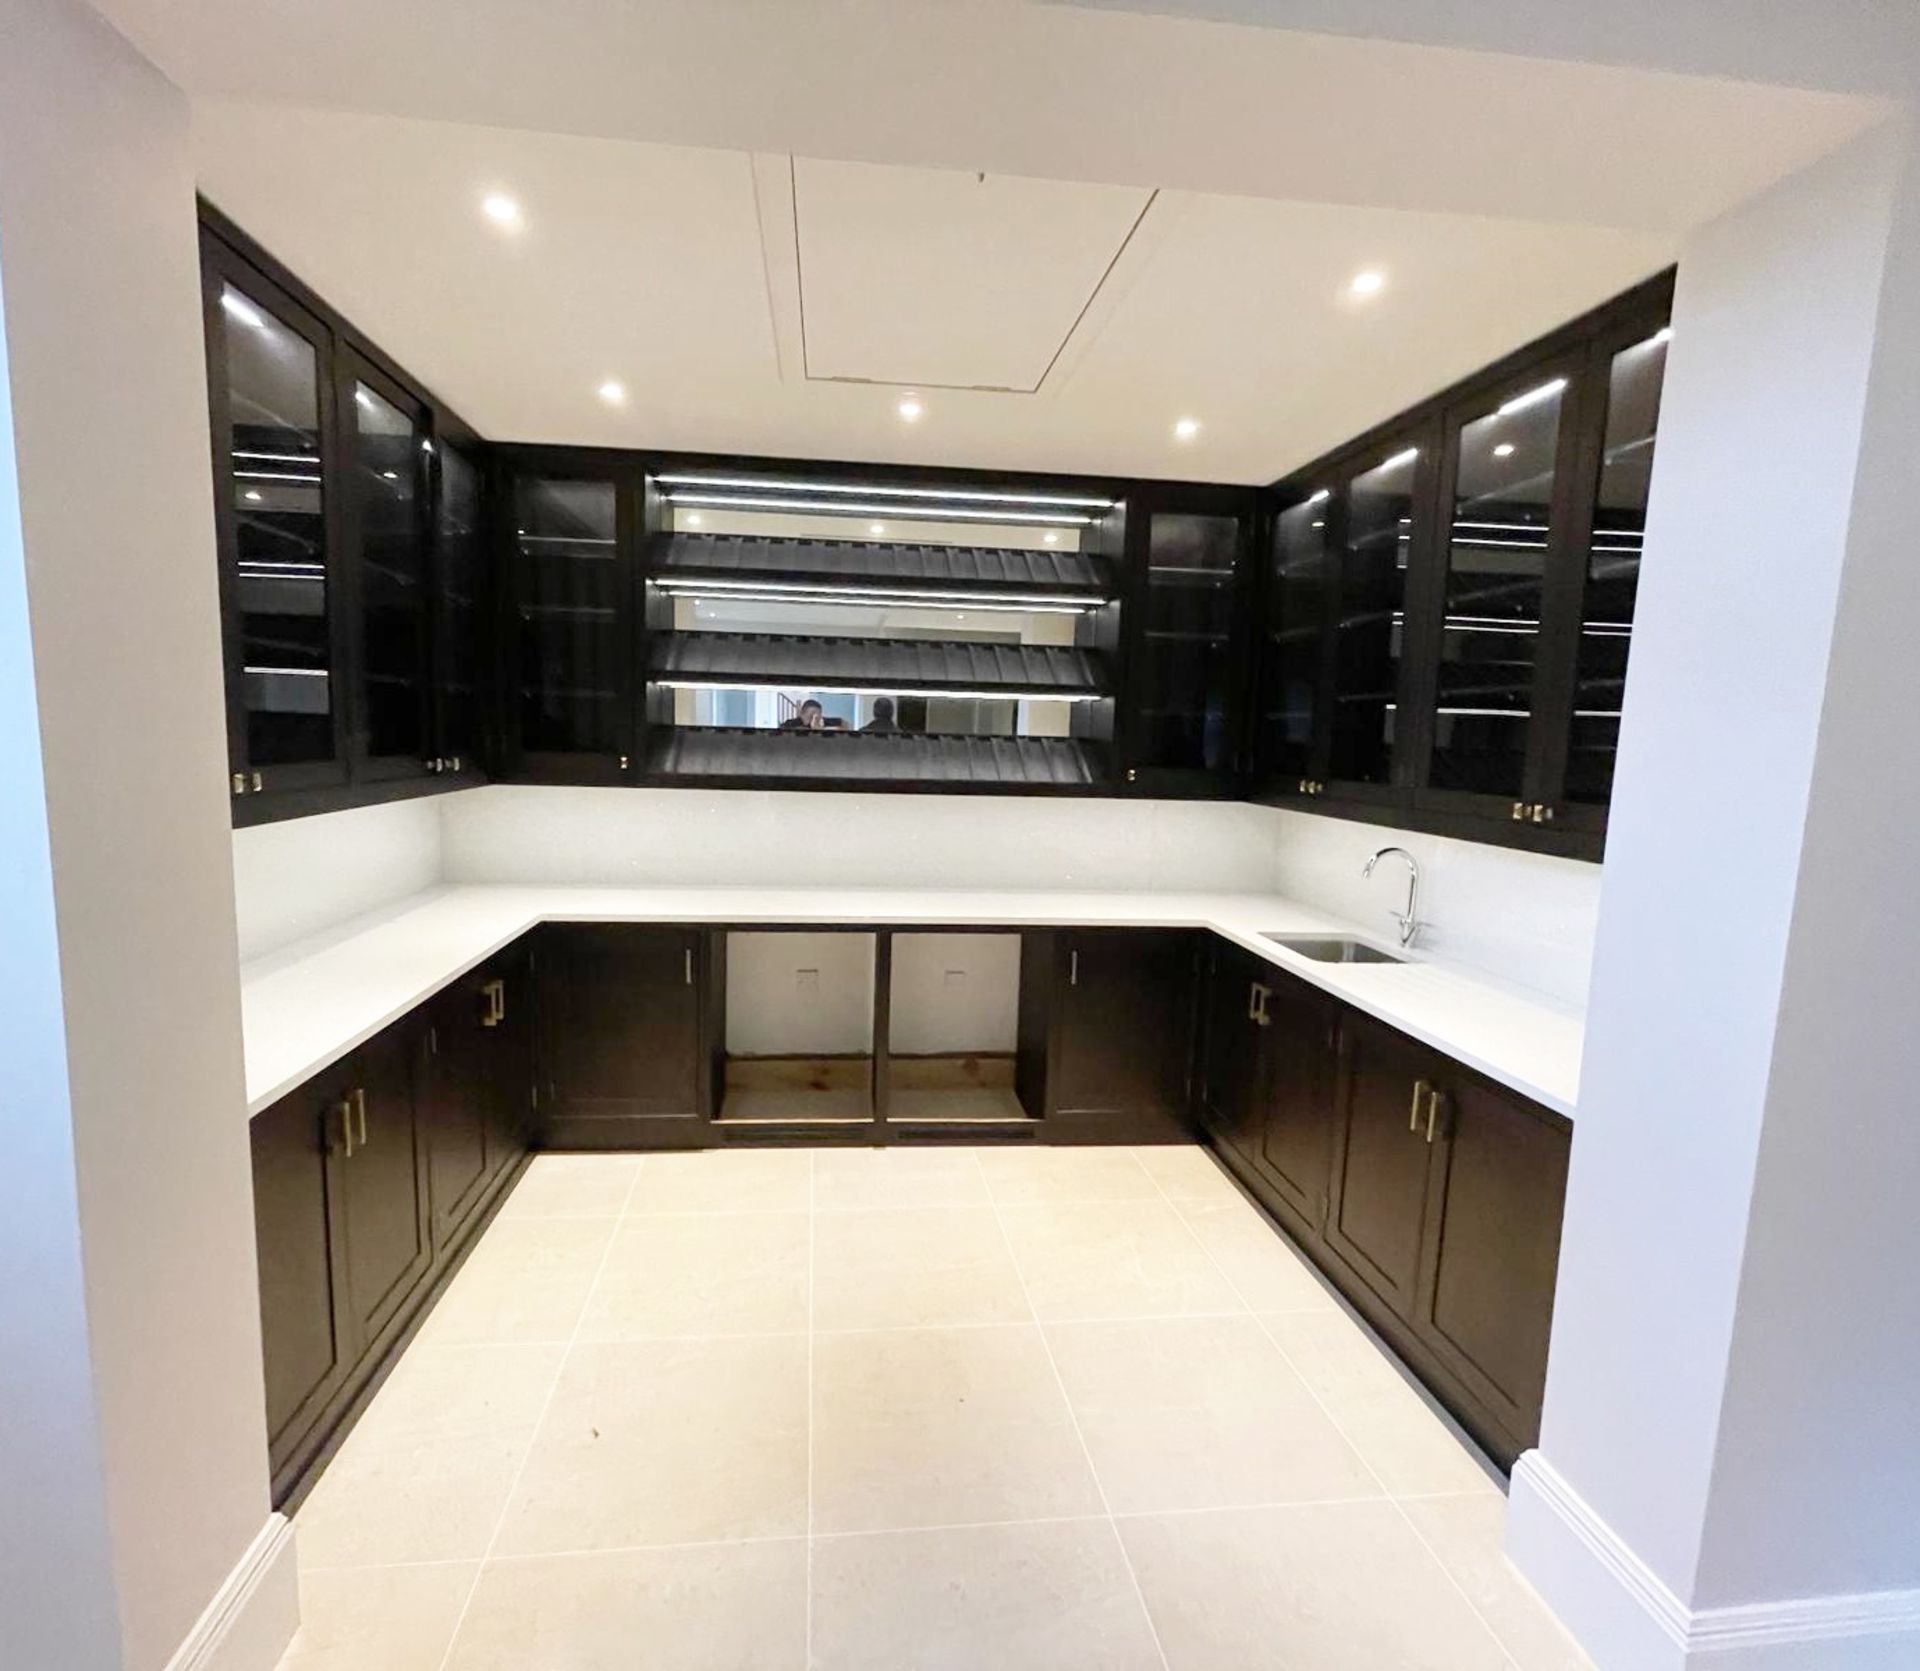 1 x Large Bespoke Fitted Luxury Home Bar with White Terrazzo Quartz Counter Worktops